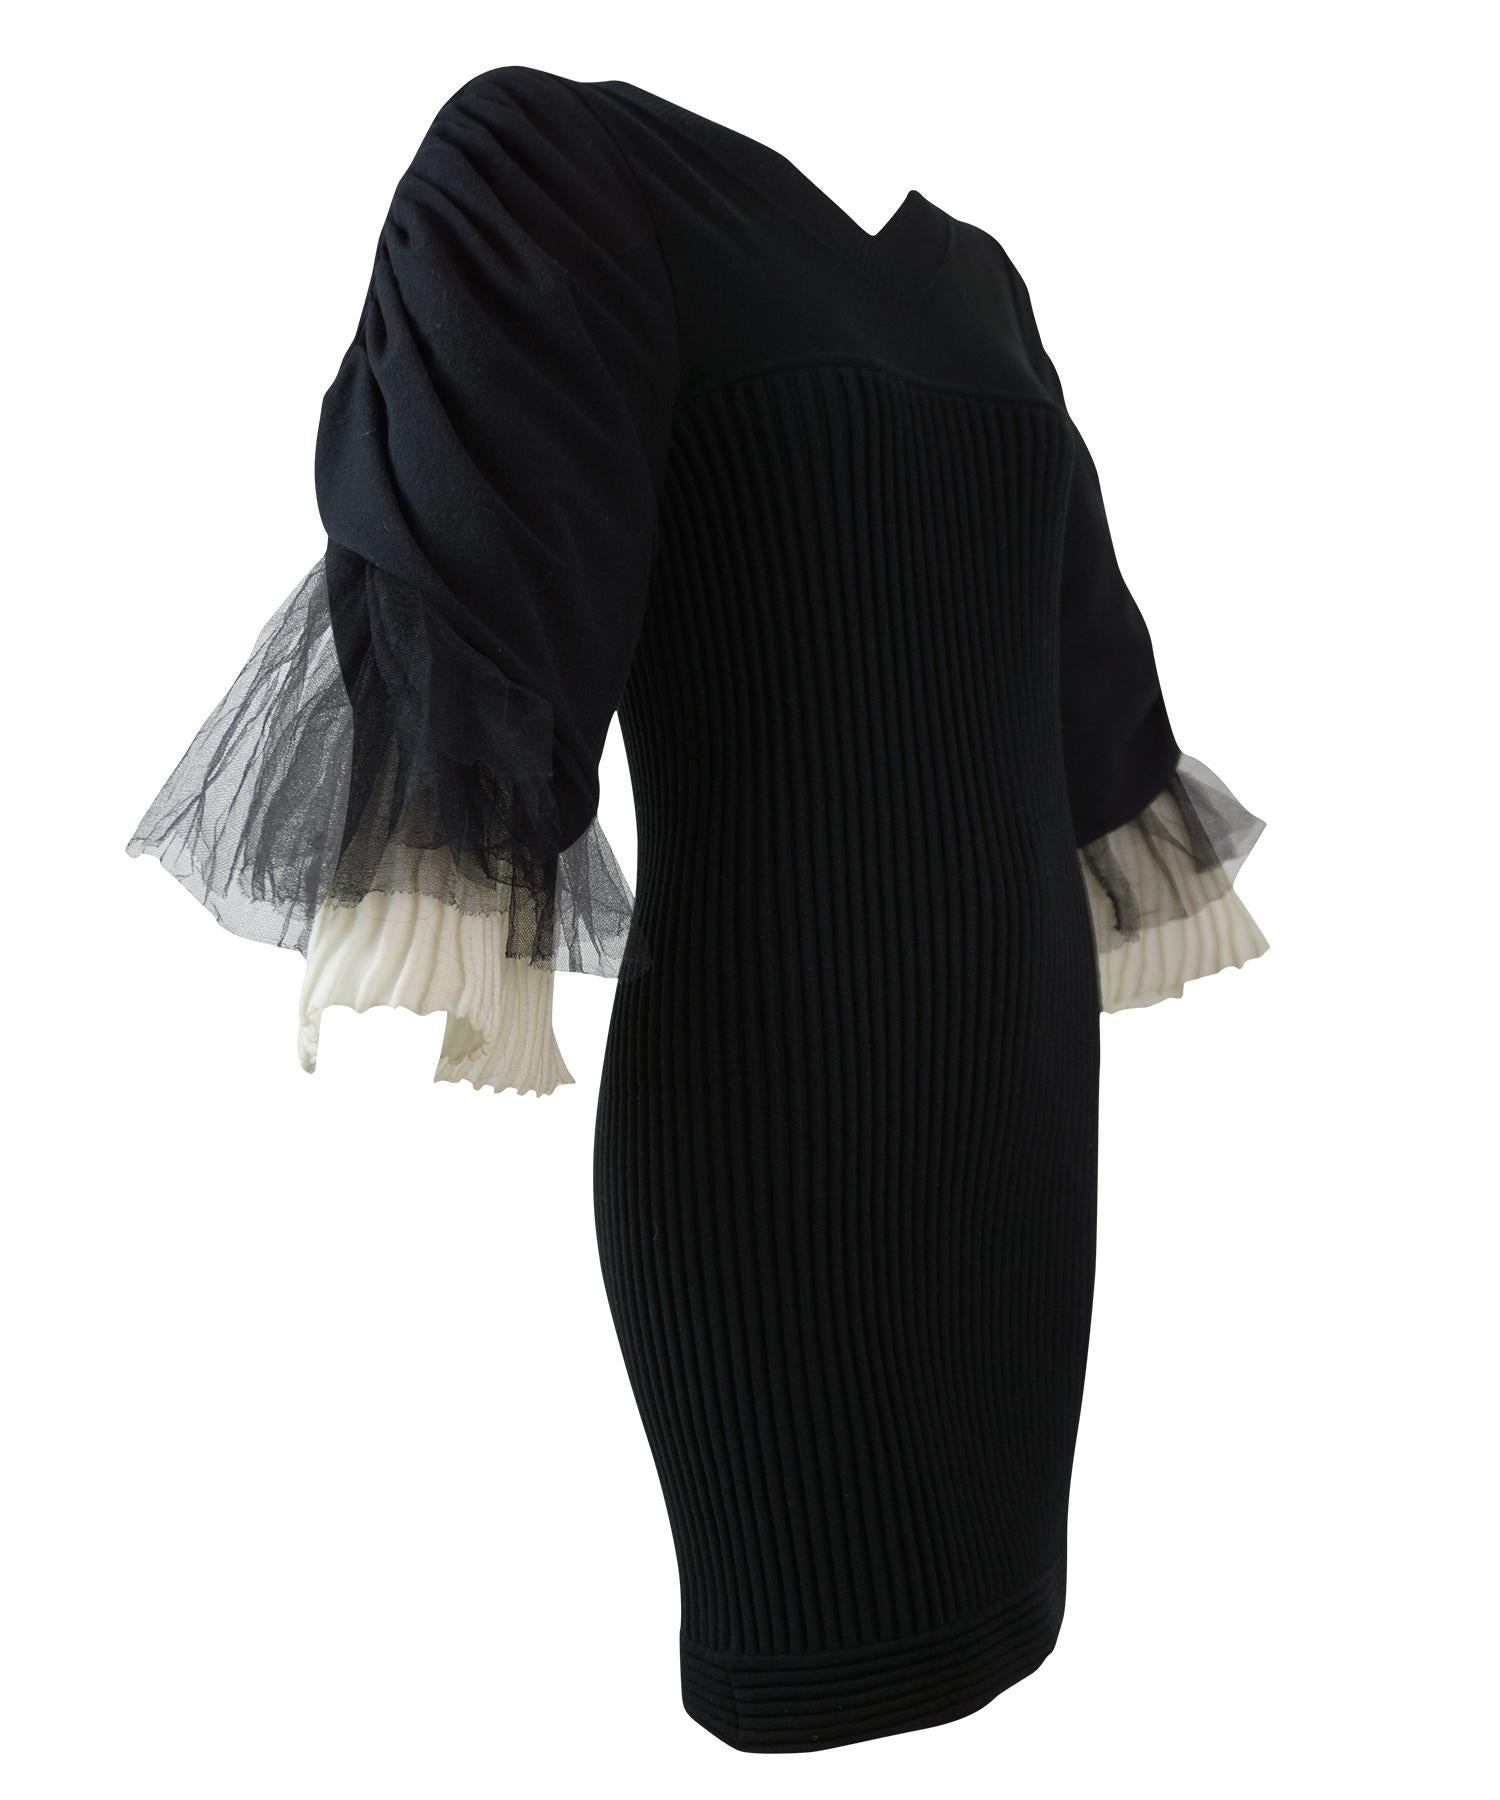 Chanel black and cream ribbed dress. Features black tulle and white pleated knit ruched sleeves, bodycon rib knit bodice, round neckline, and CC pearl back zip closure. From the Spring 2009 collection. Designer size 38. Made in